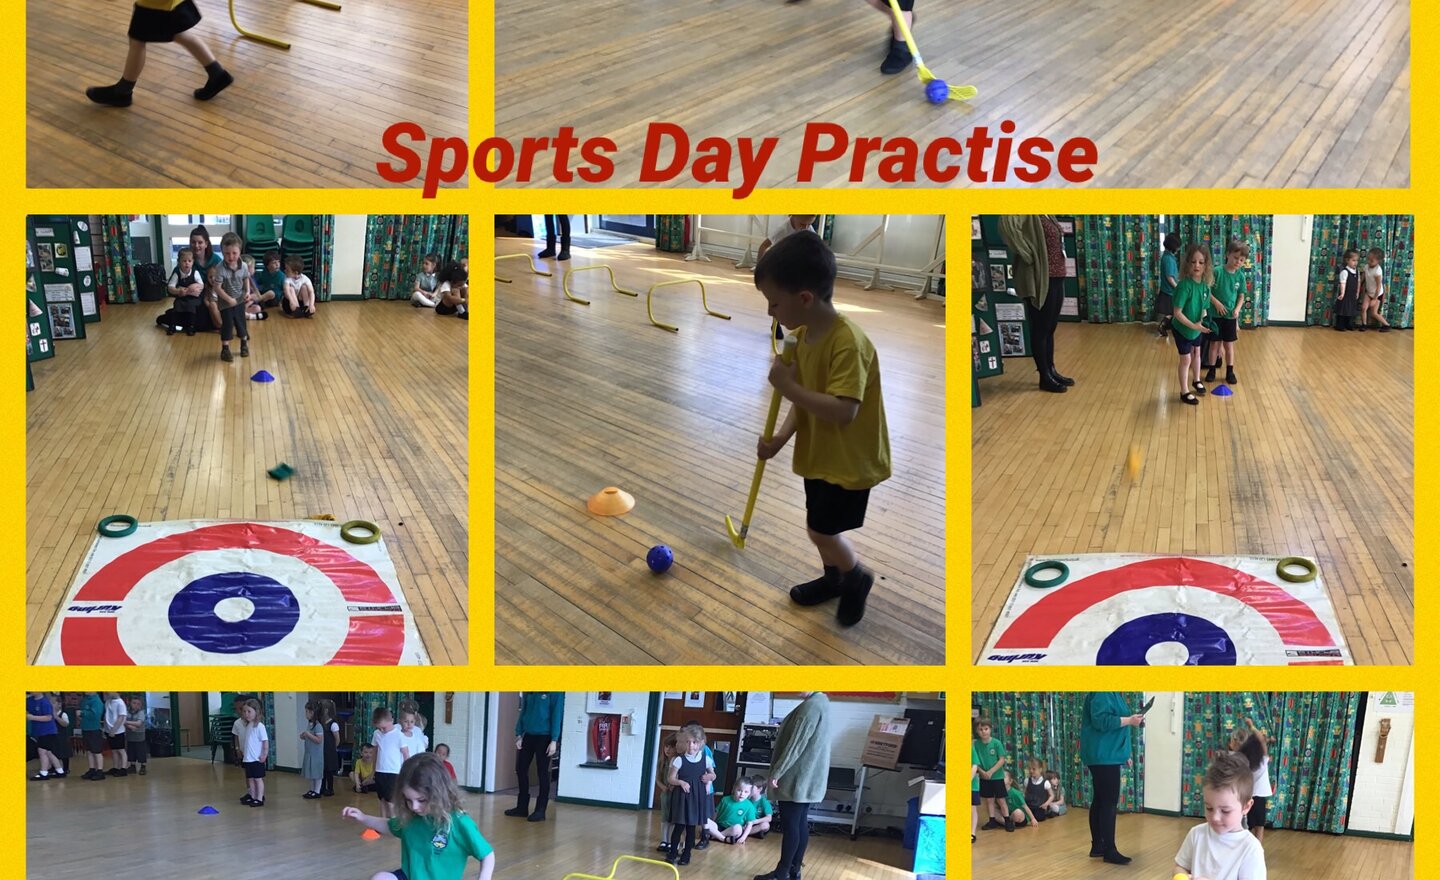 Image of Sports Day Practise